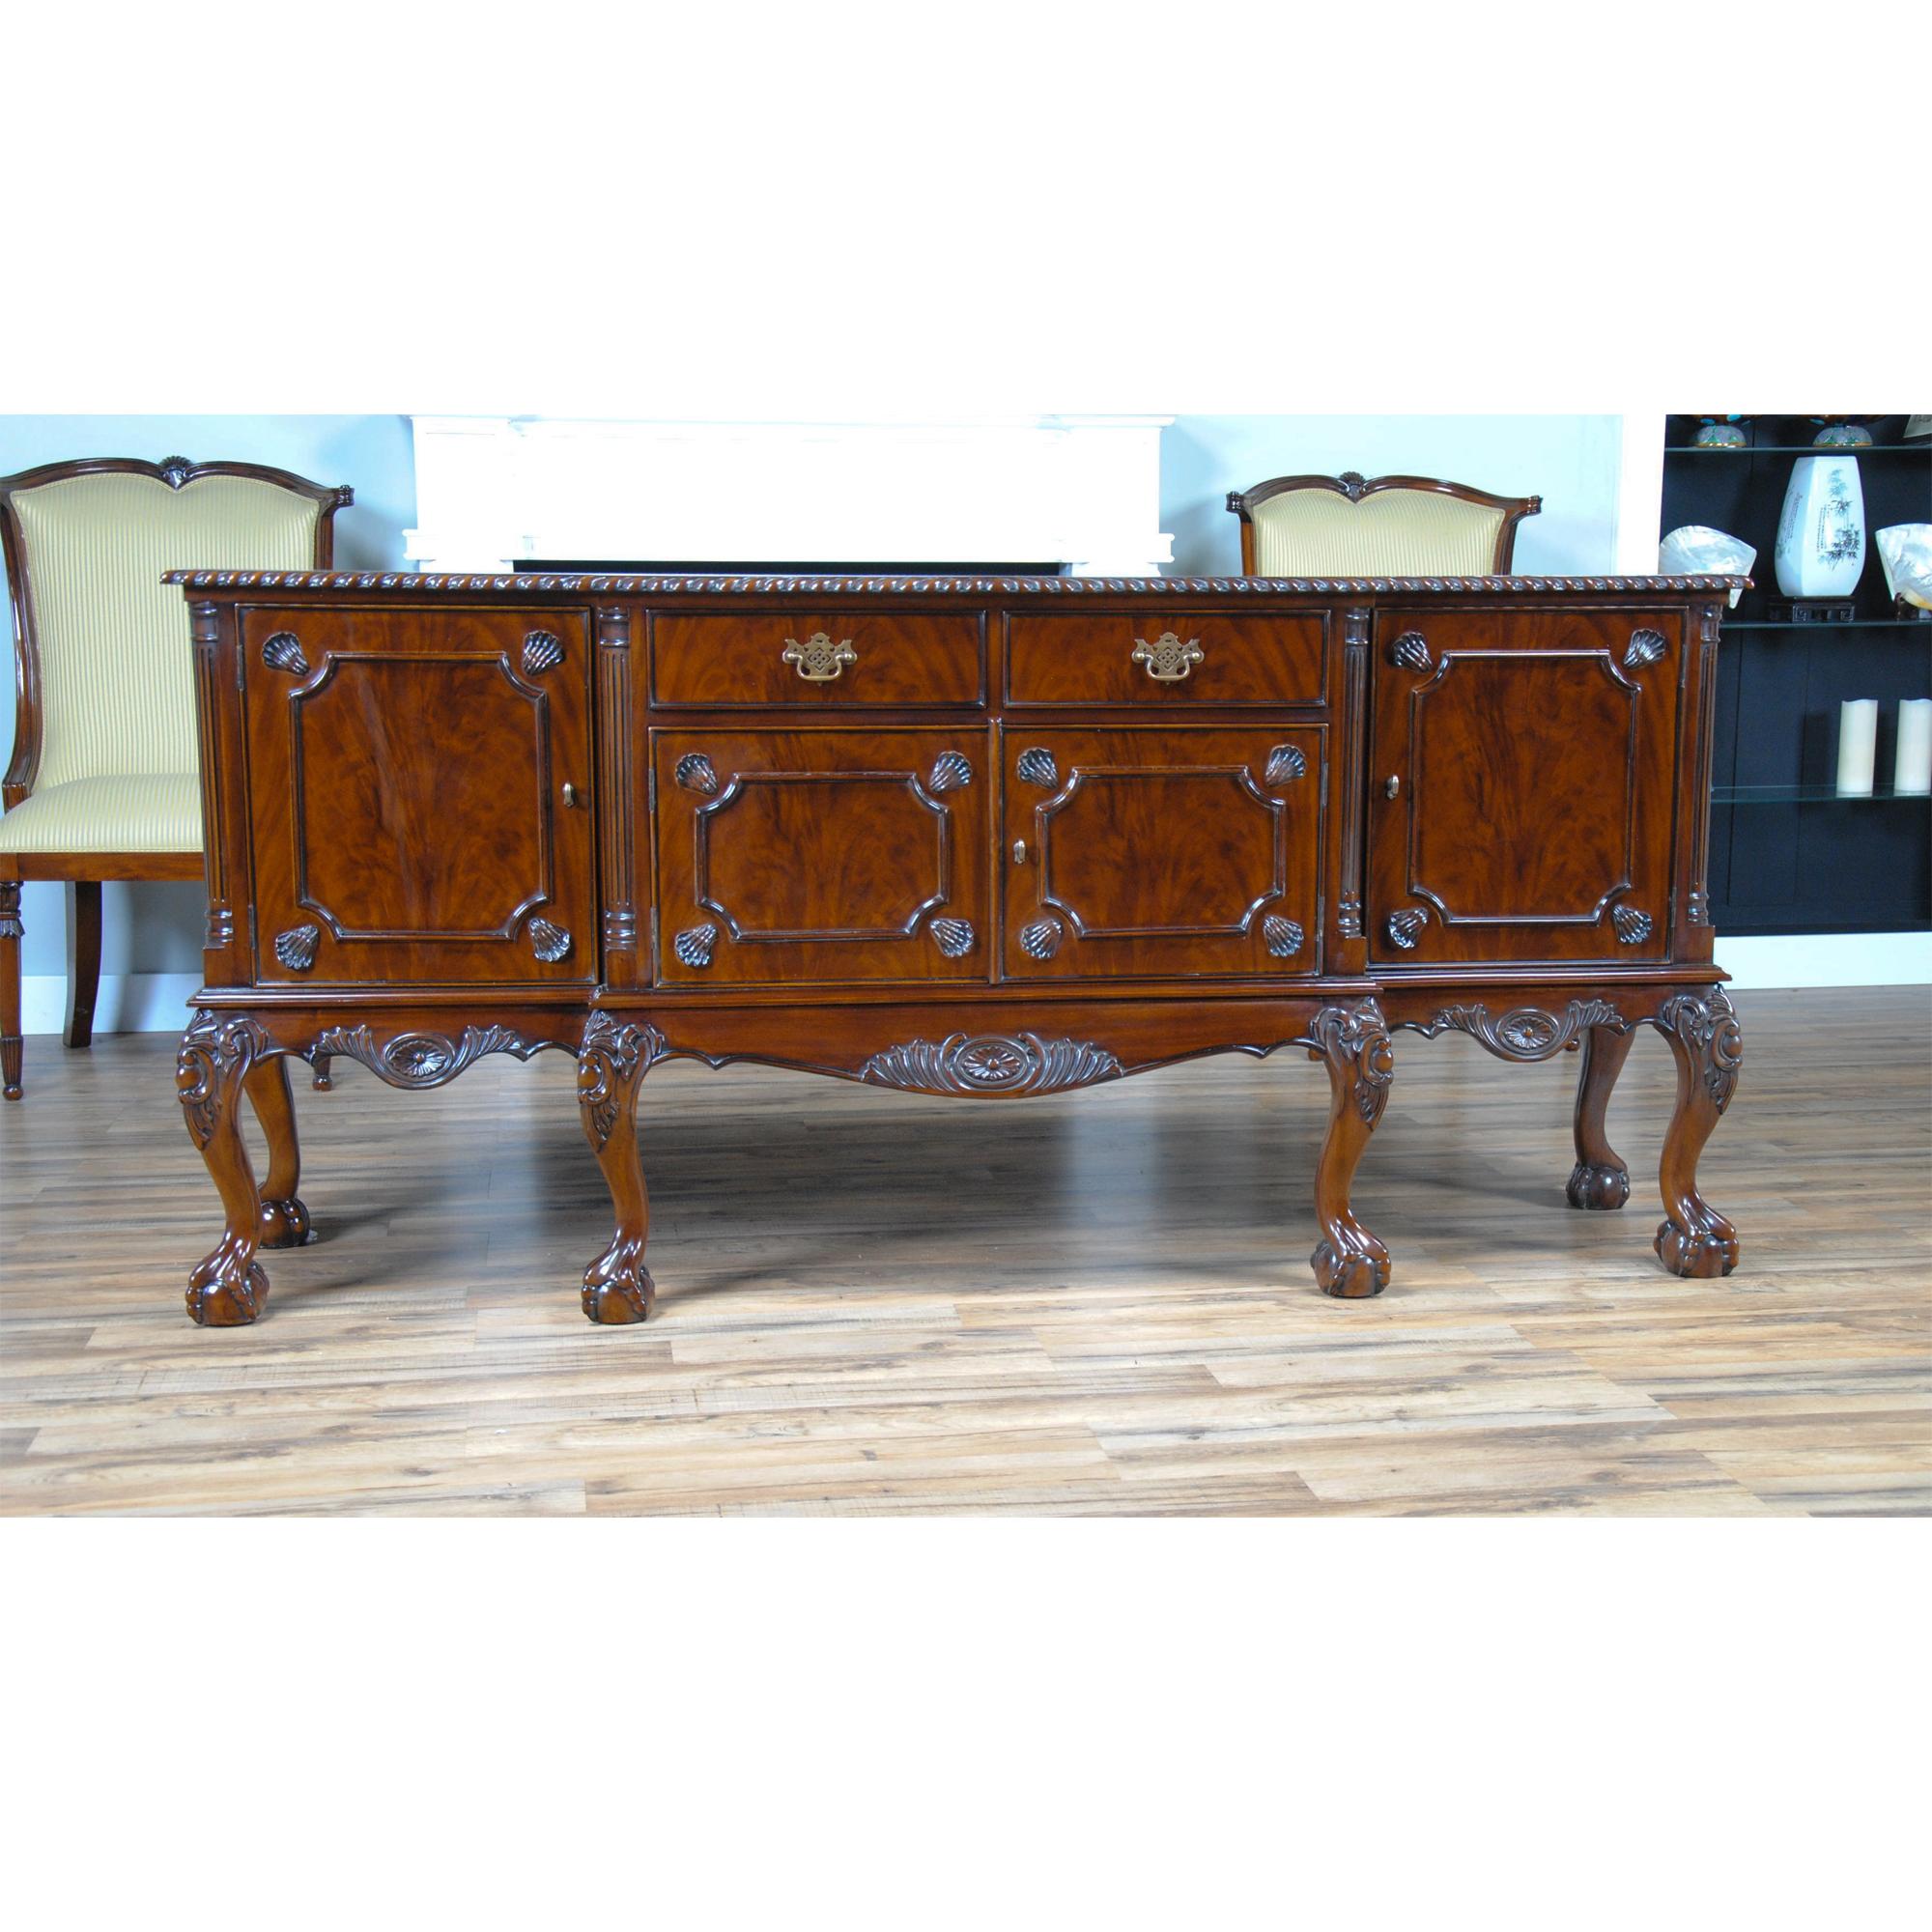 The Mahogany Buffet is a Chippendale inspired piece of furniture and closely matches our Mahogany Chippendale Breakfront. The bank of four dovetailed drawers align over the four figural veneered doors which conceal large storage areas, all resting